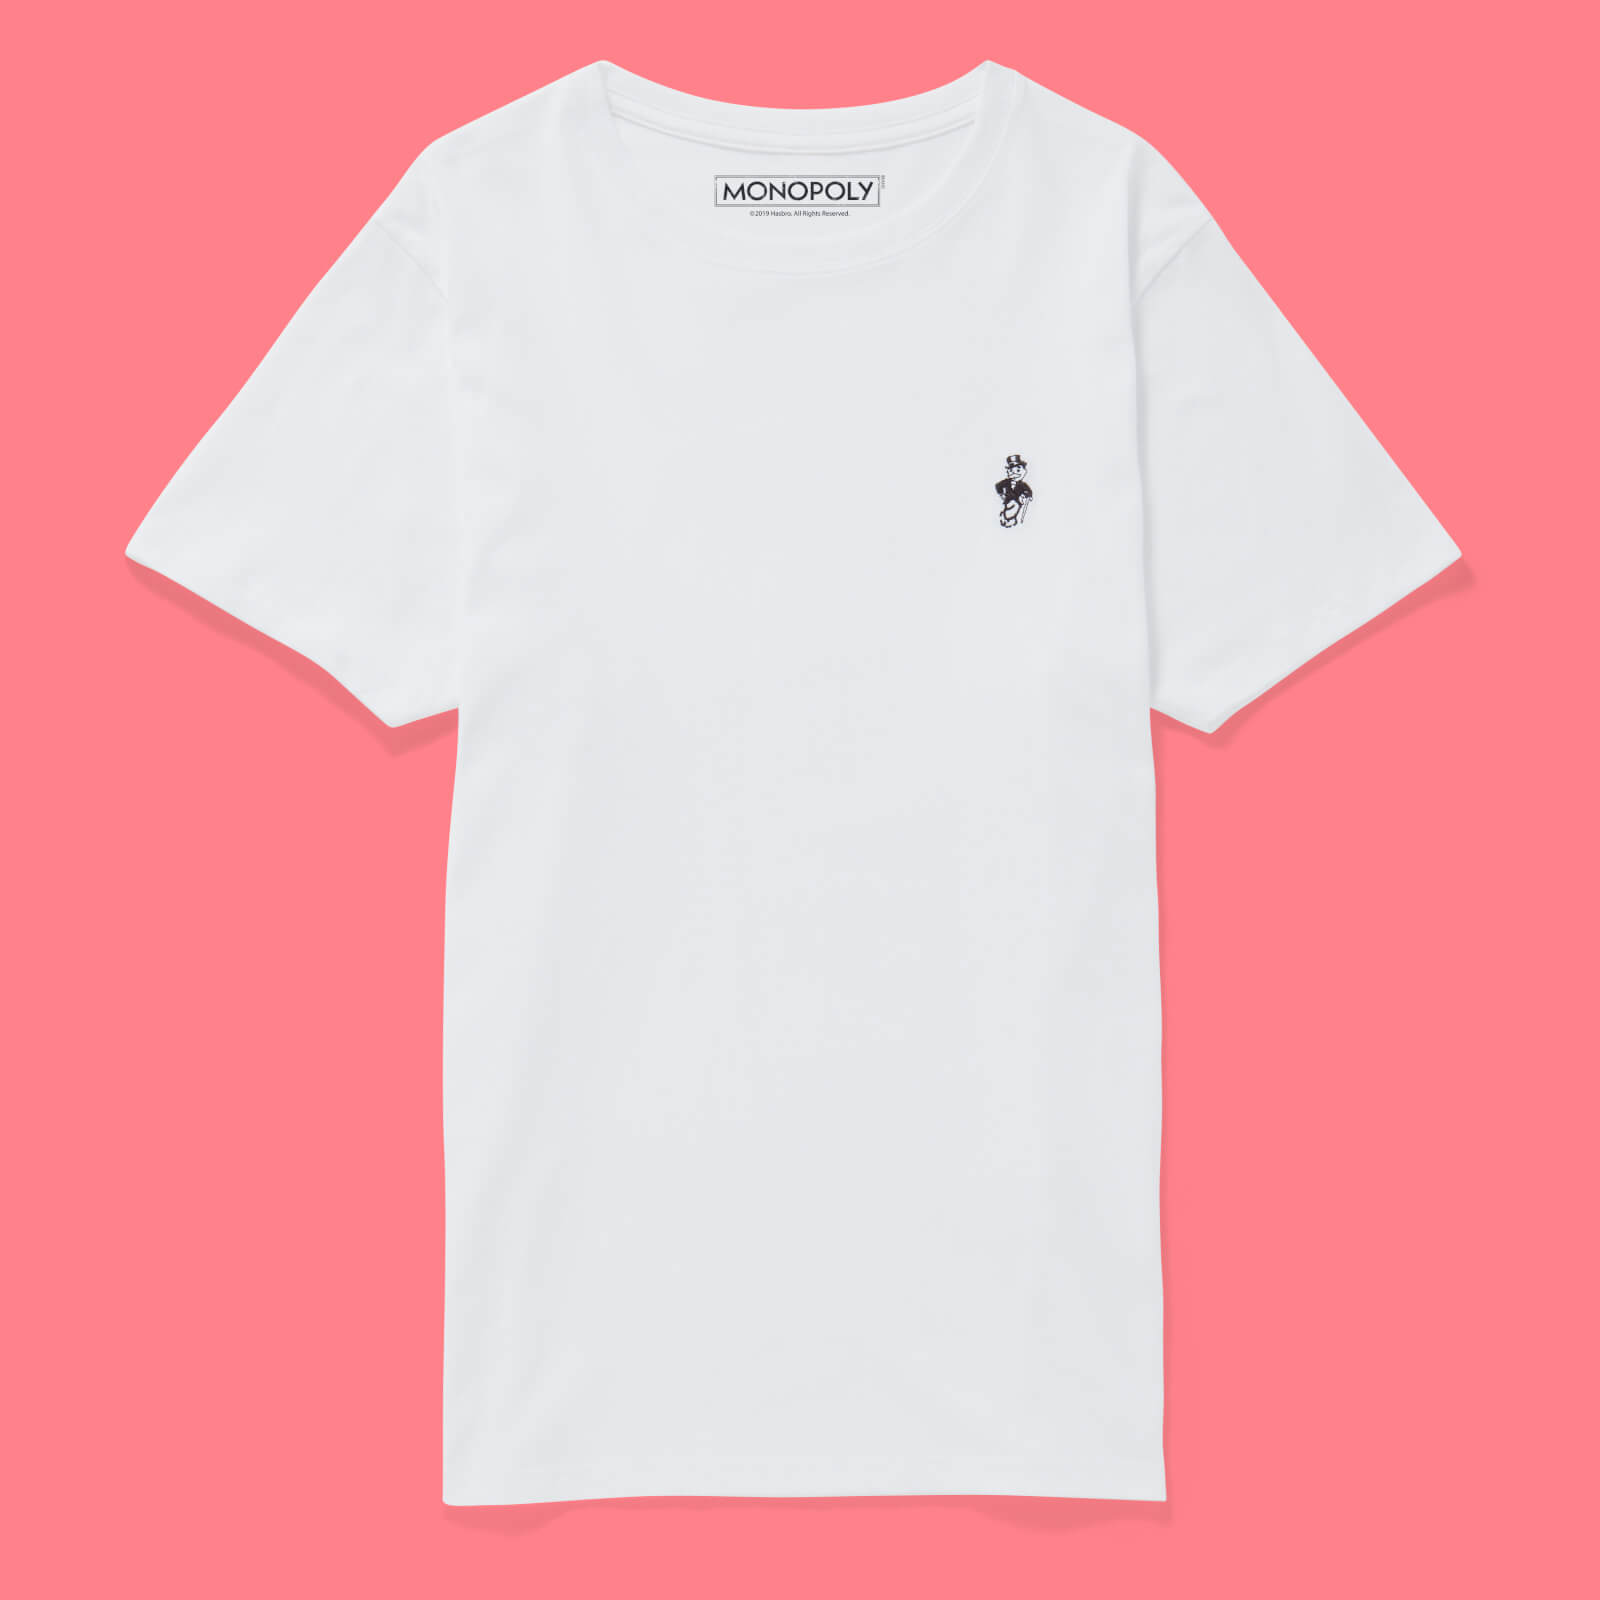 Monopoly Mr Monopoly Embroidered T-Shirt - White - S - White